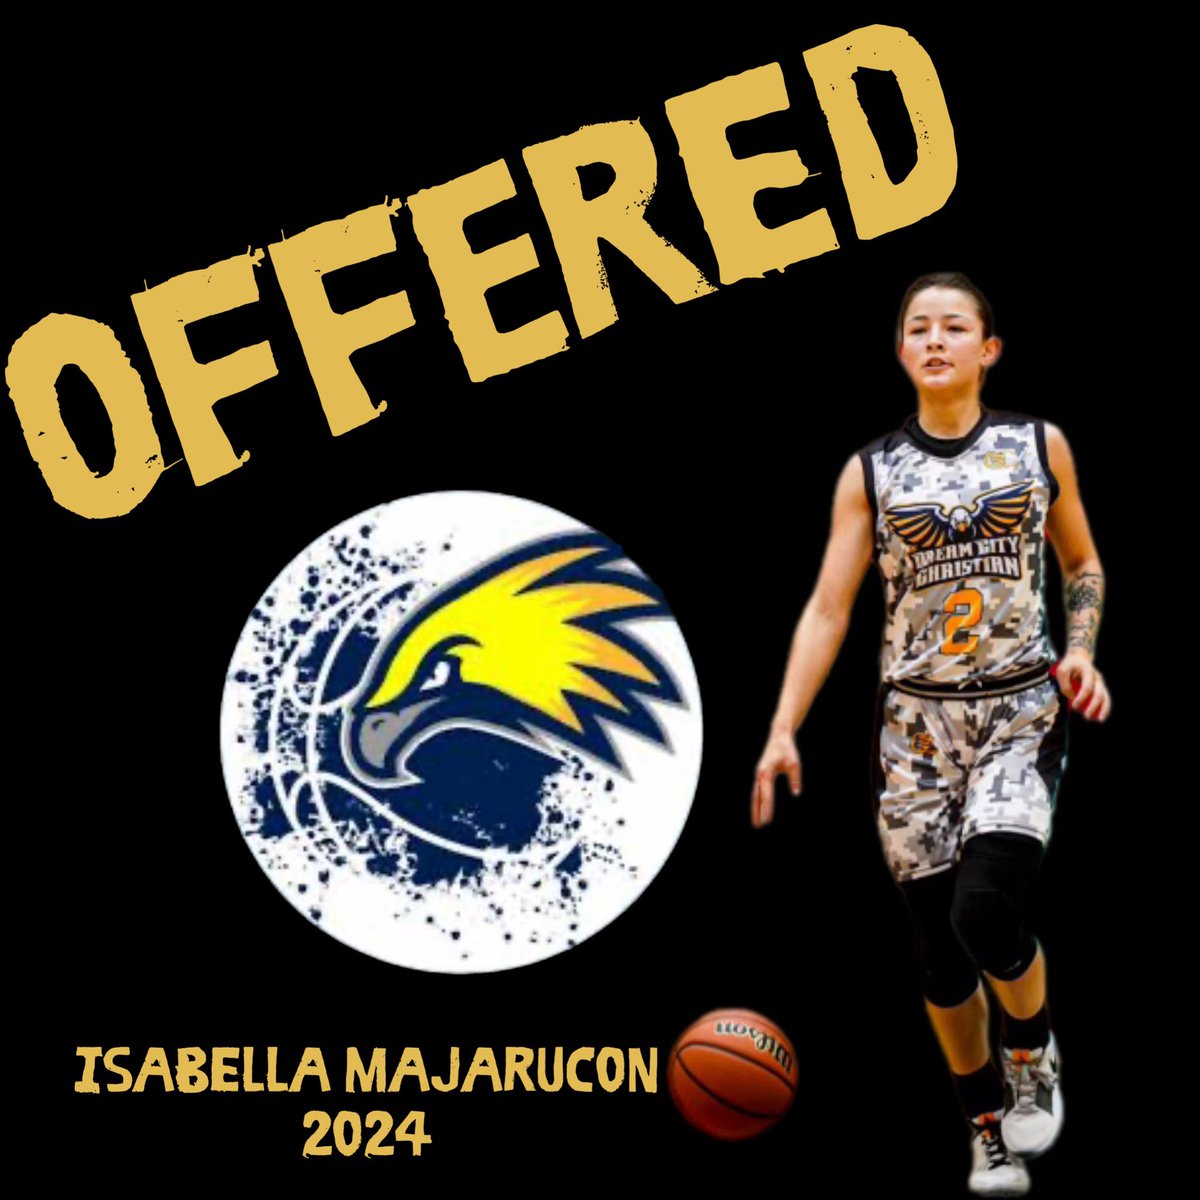 Congrats to @ijmmaja on her offer from @LCCCWBasketball . #ourcitydreamcity